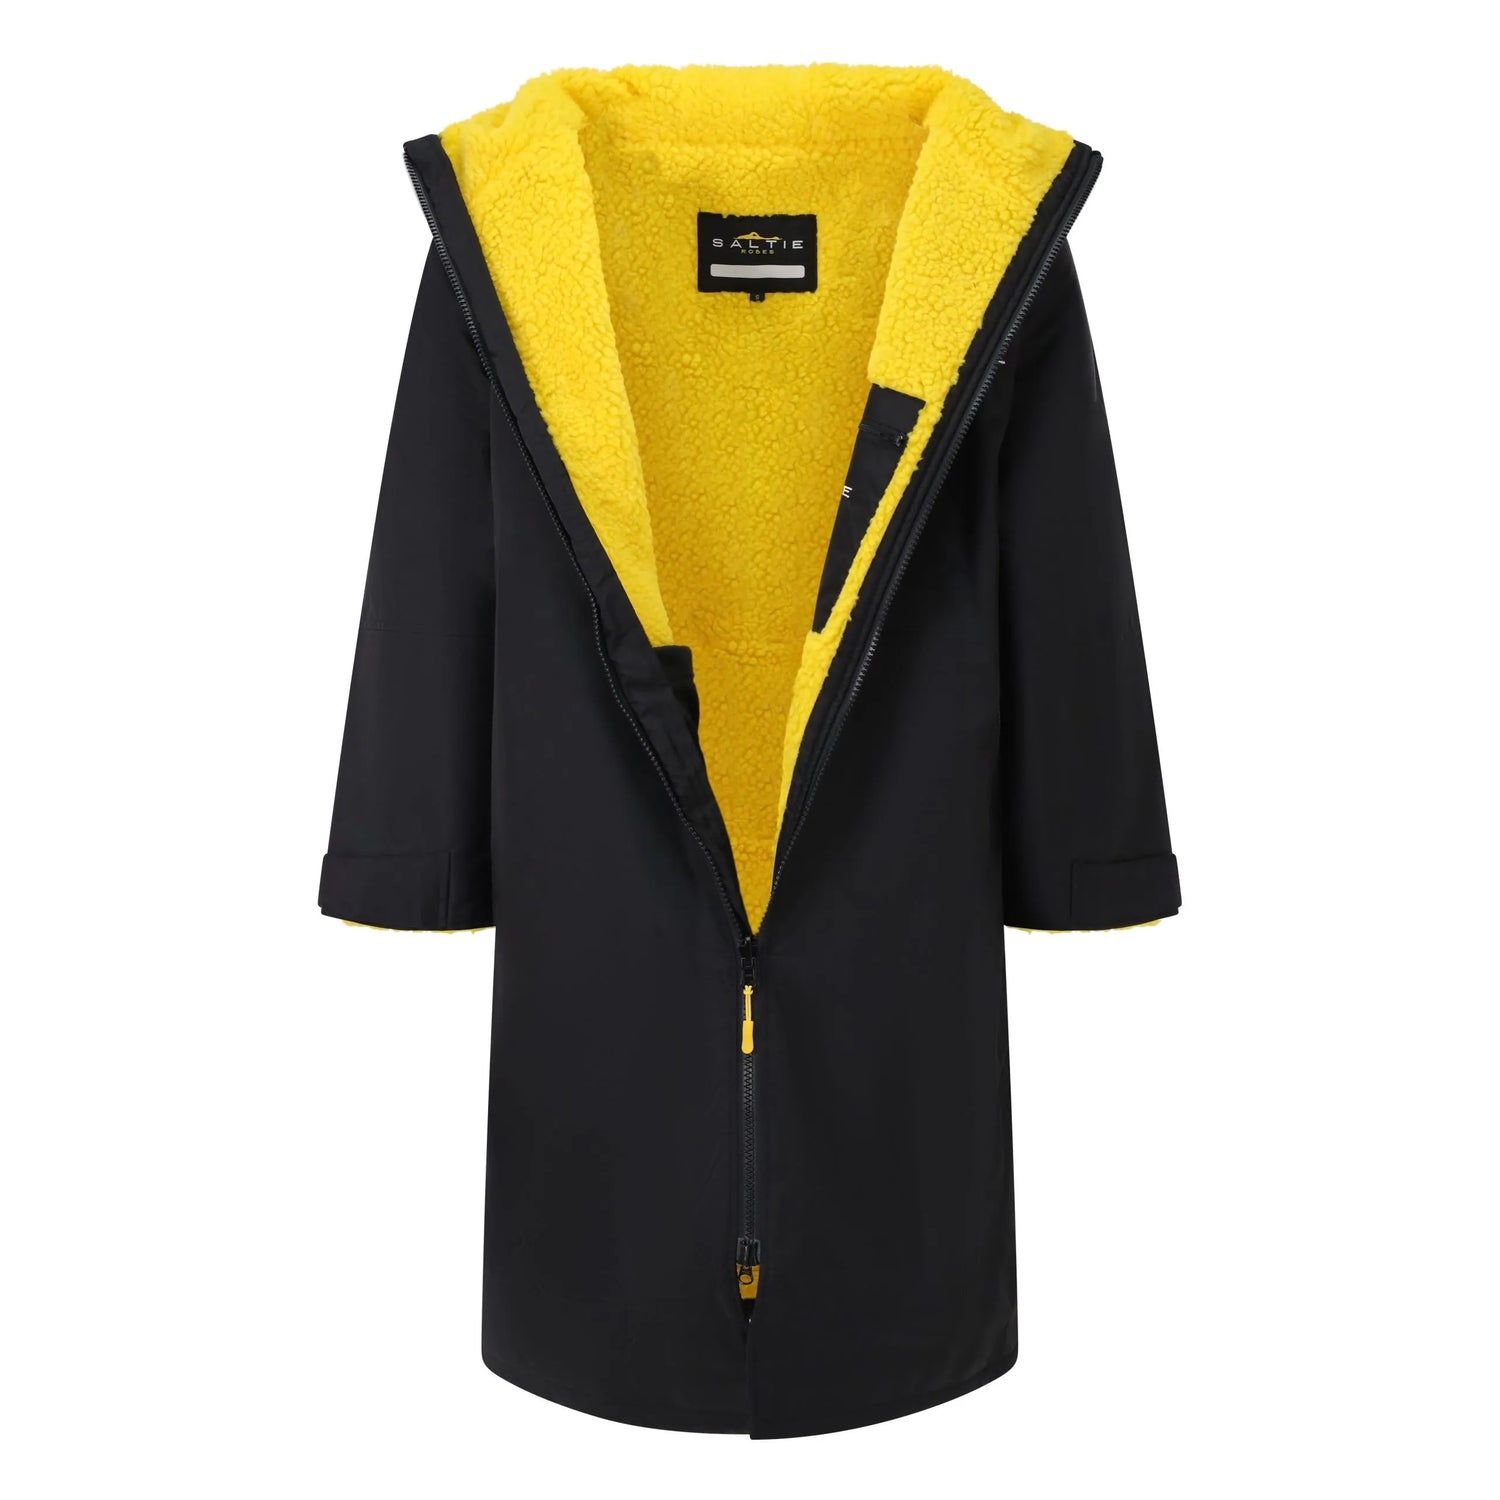 SALTIE Changing Robe in yellow, weather resistant, perfect for changing on the beach and made using 100% recycled materials. The SALTIE changing robe is designed keep you warm and dry during your sea swim, beach walks and all of your outdoor adventures.